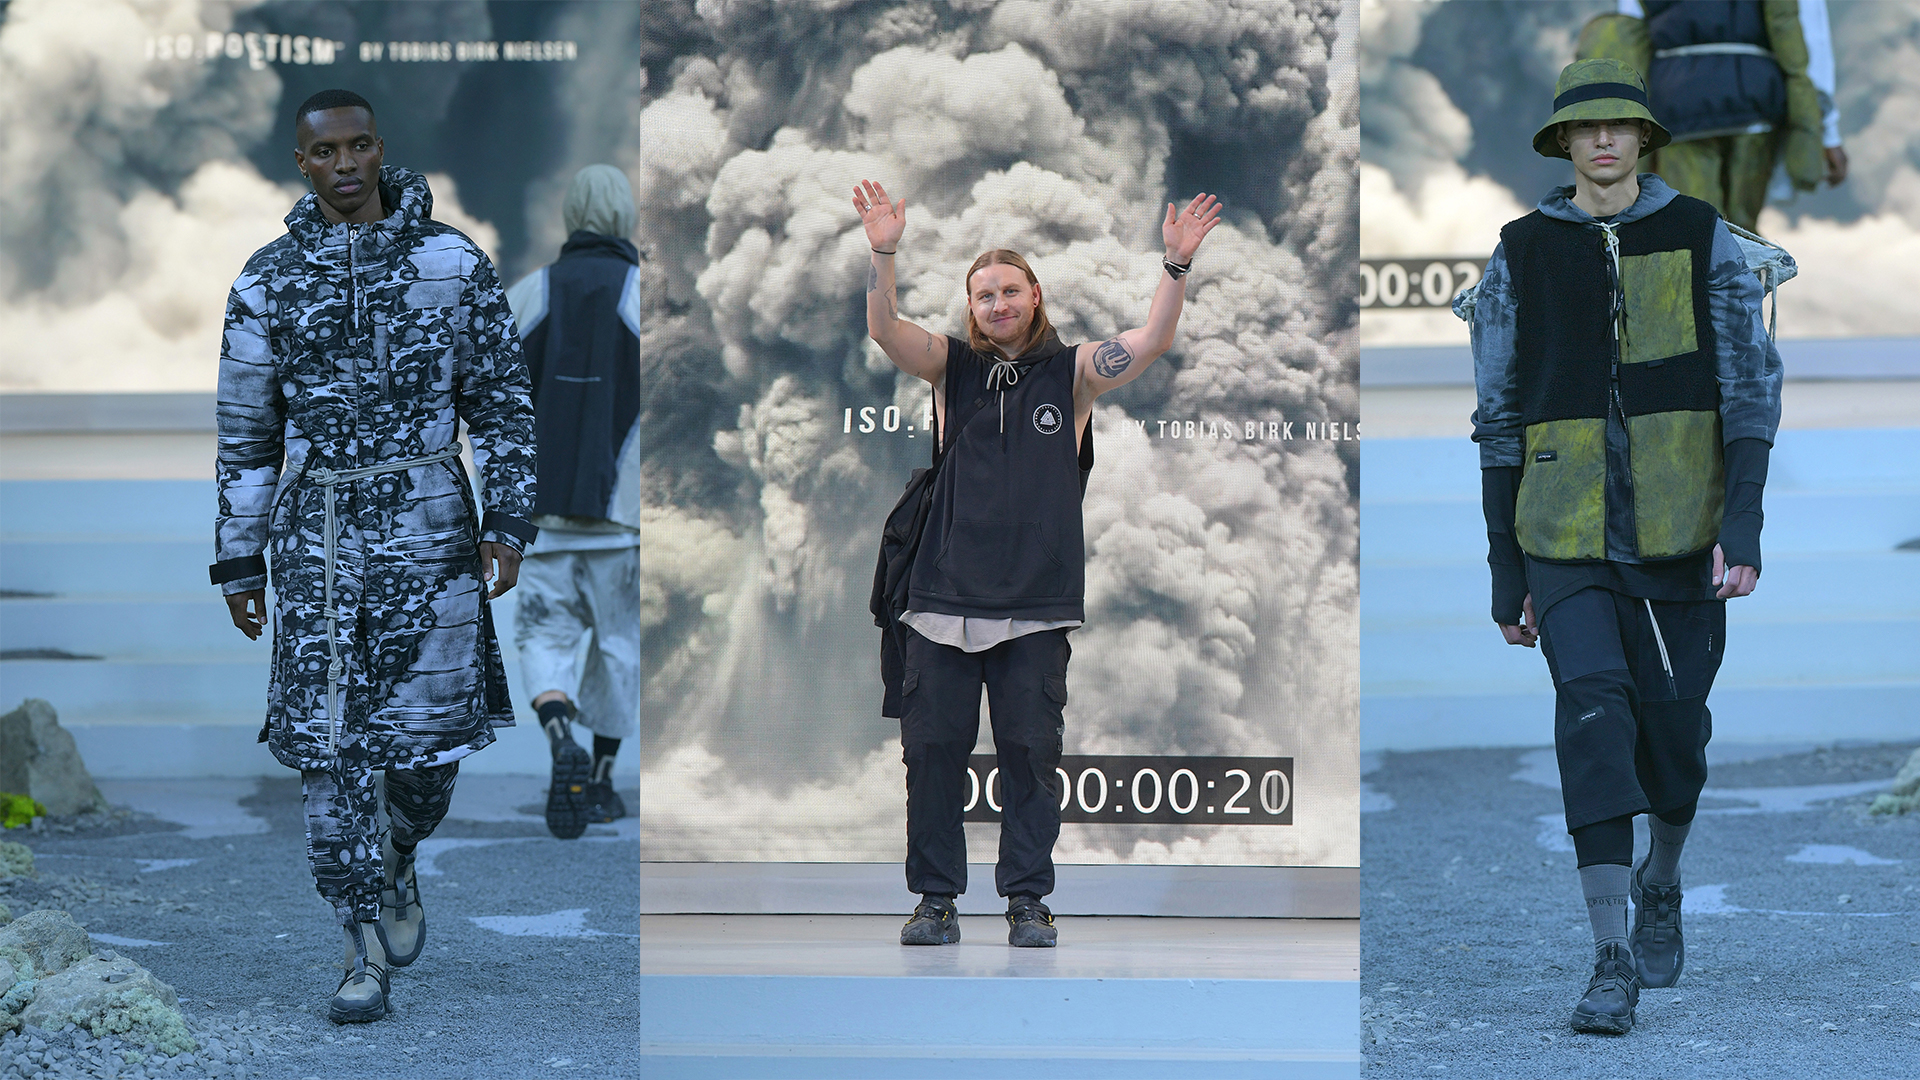 Collage of three images: left and right: male models on the runway; center: award winner waving from the stage